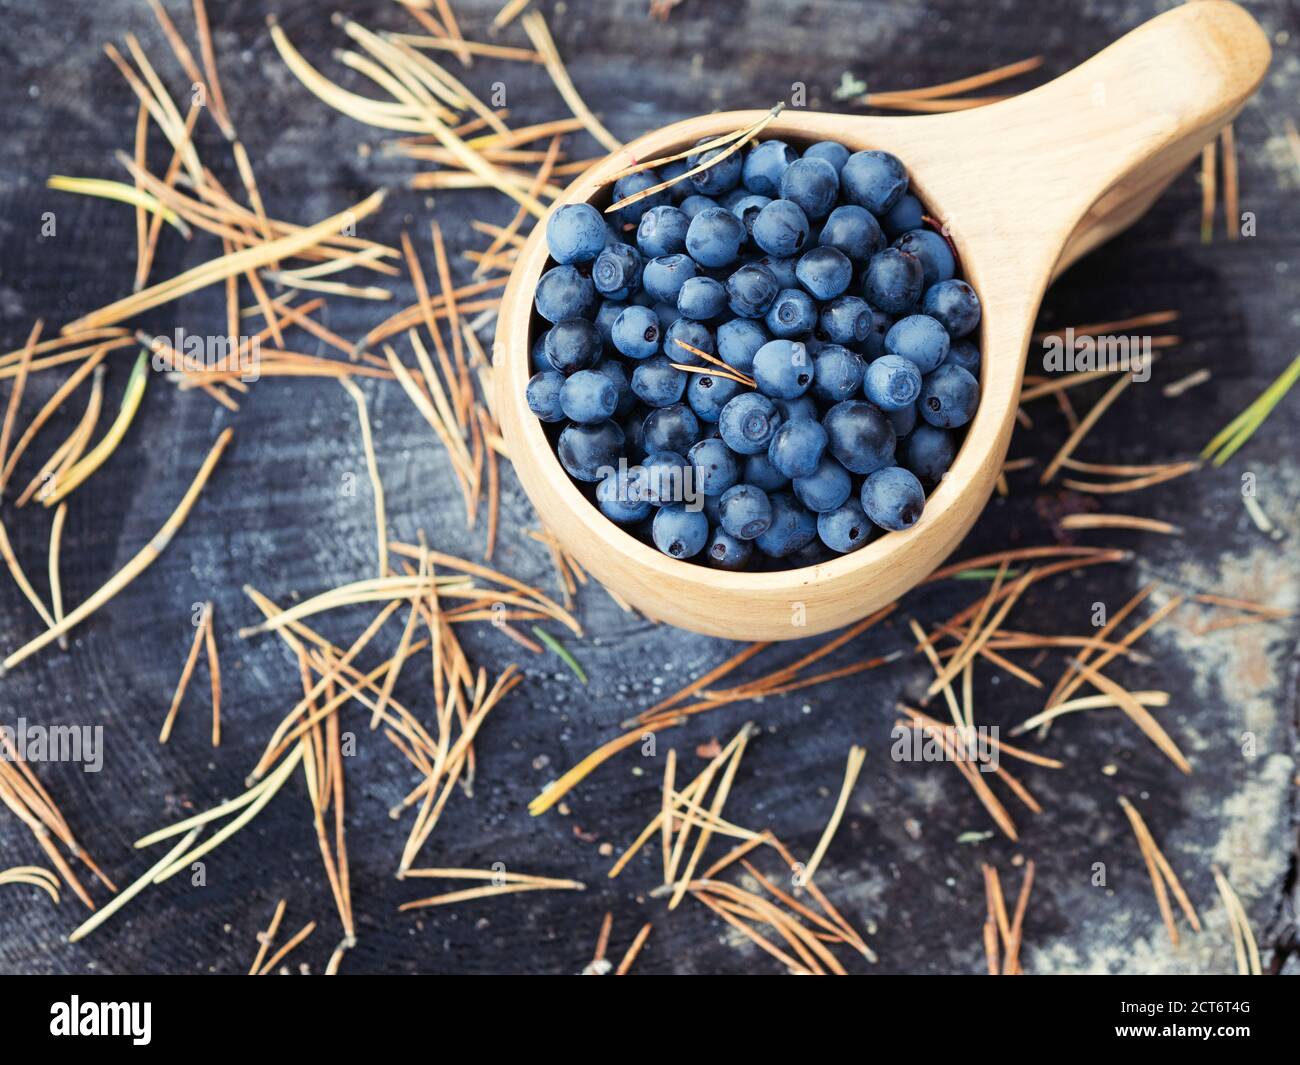 Fresh blueberries in a wooden mug on a stump in the forest. Delicious and healthy food concept. Stock Photo